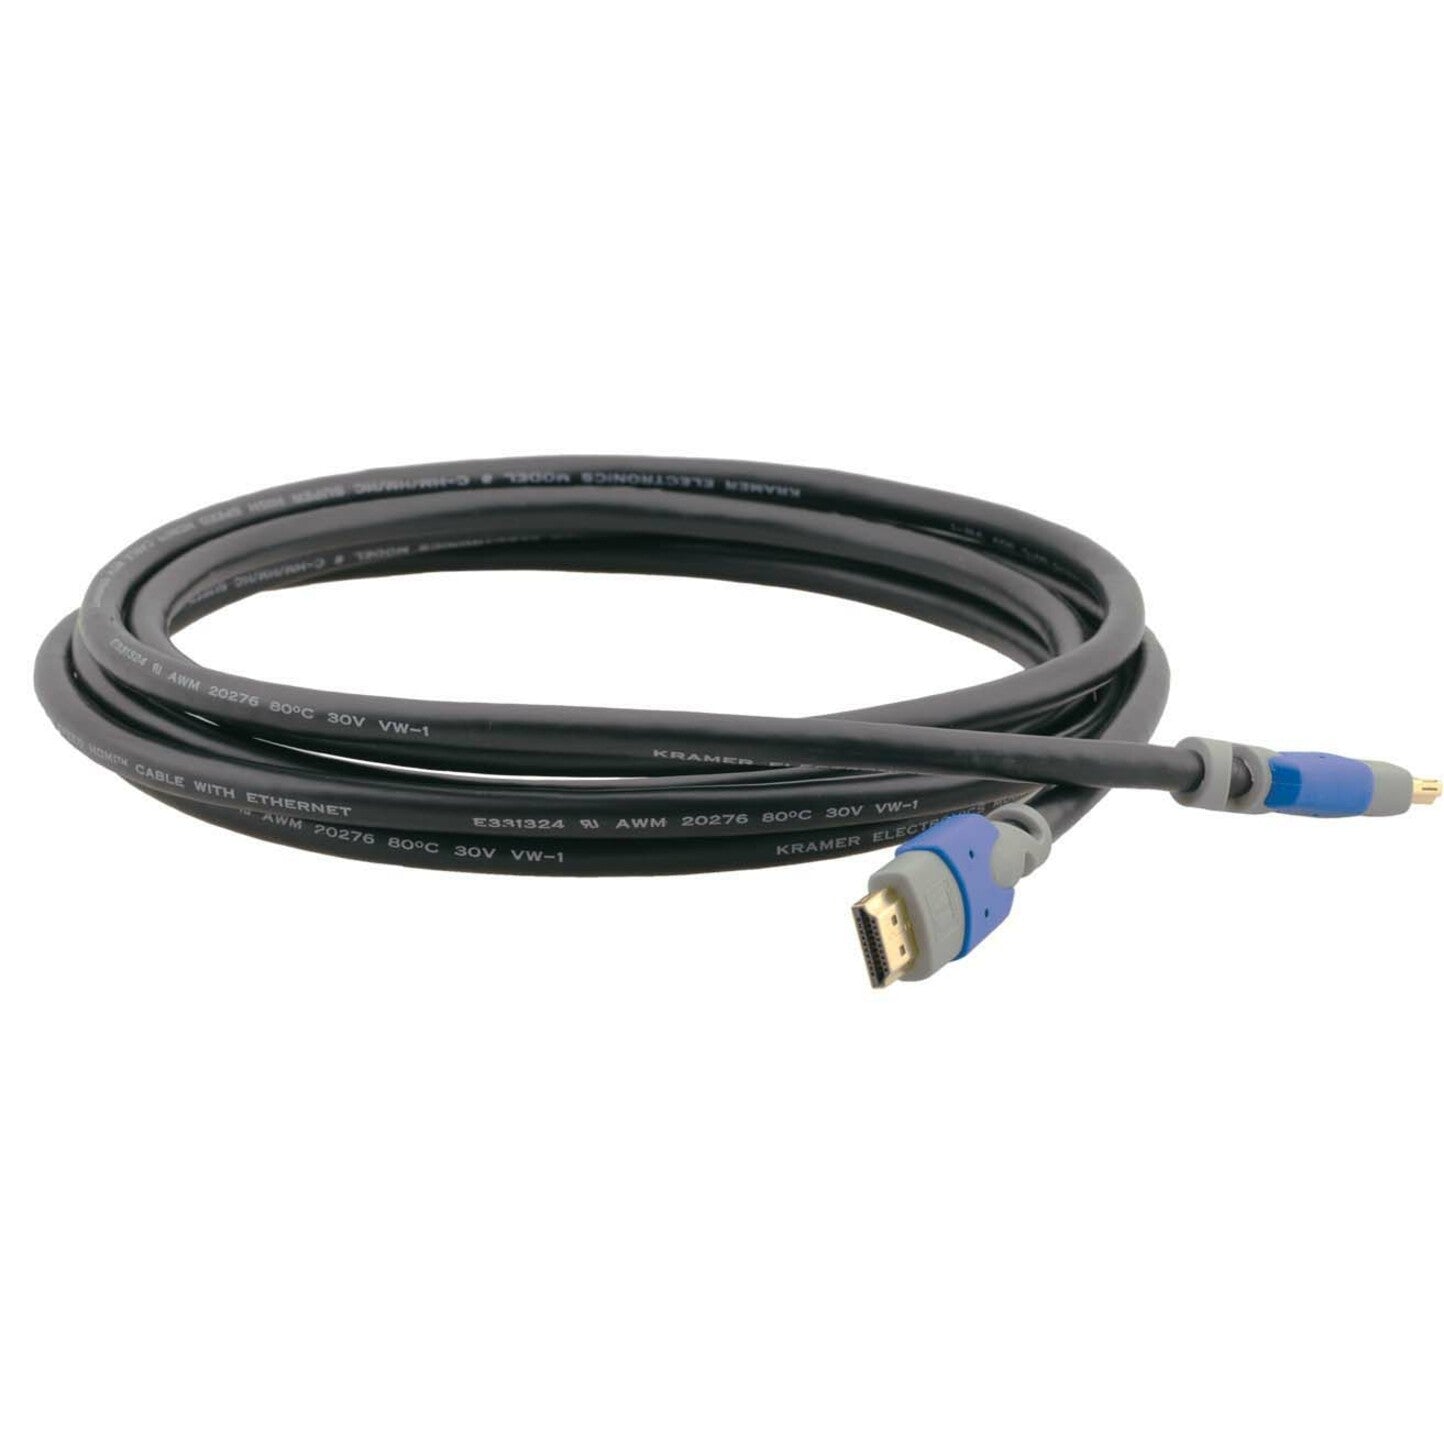 Kramer C-HM/HM/PRO-3 High-Speed HDMI Cable with Ethernet, 3 ft, Molded, Copper Conductor, Gold Plated Connectors